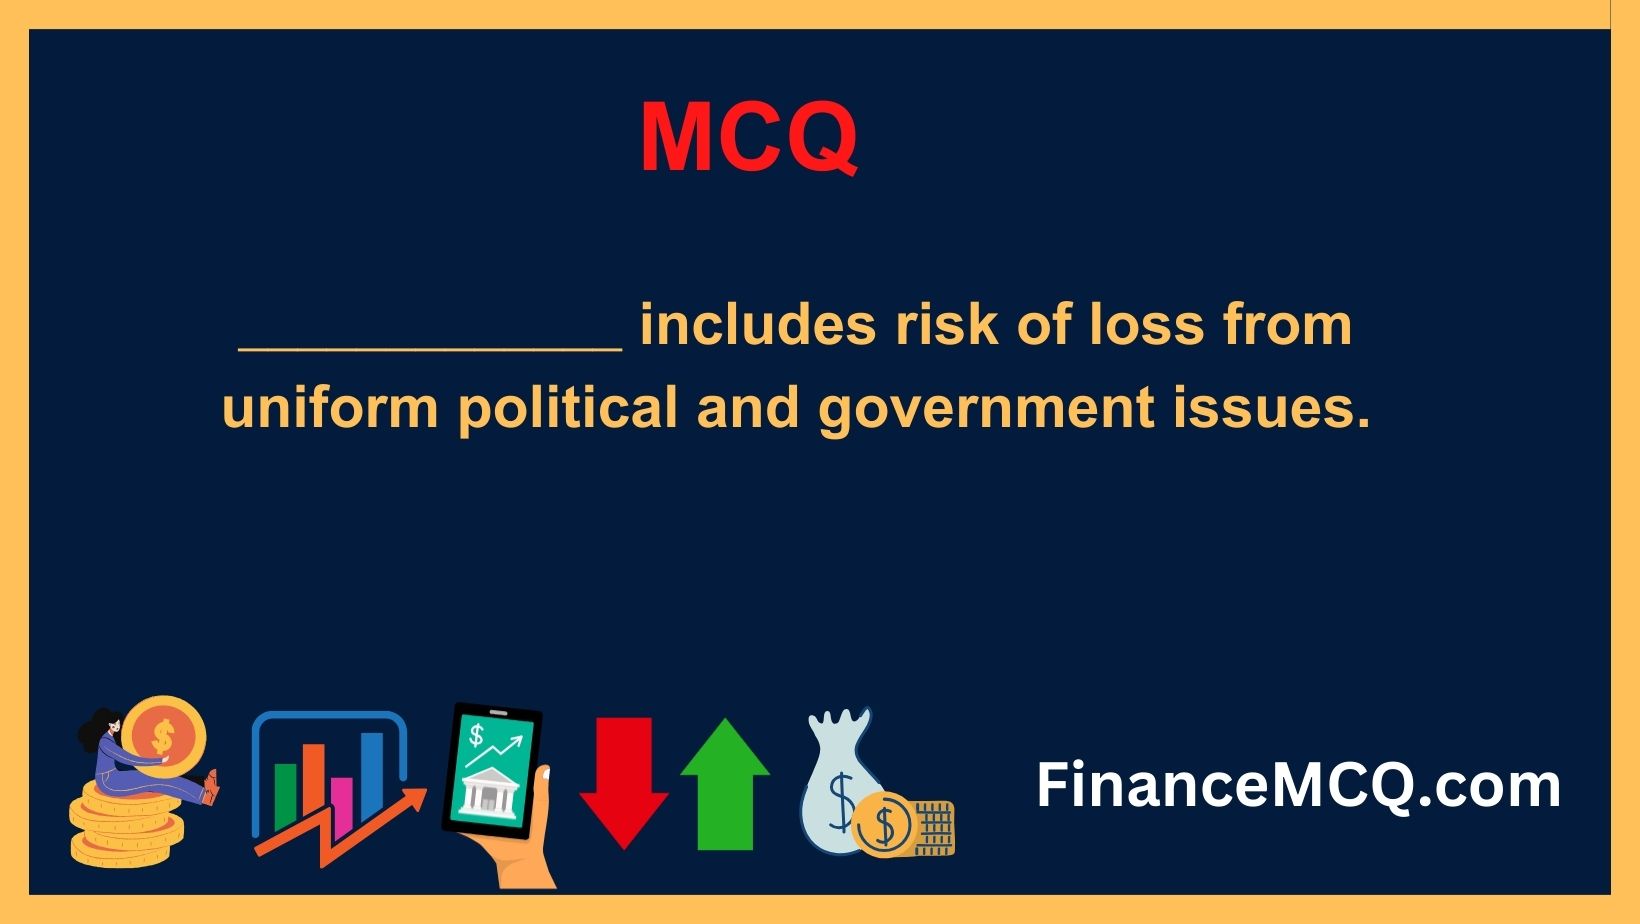 _____________ includes risk of loss from uniform political and government issues.